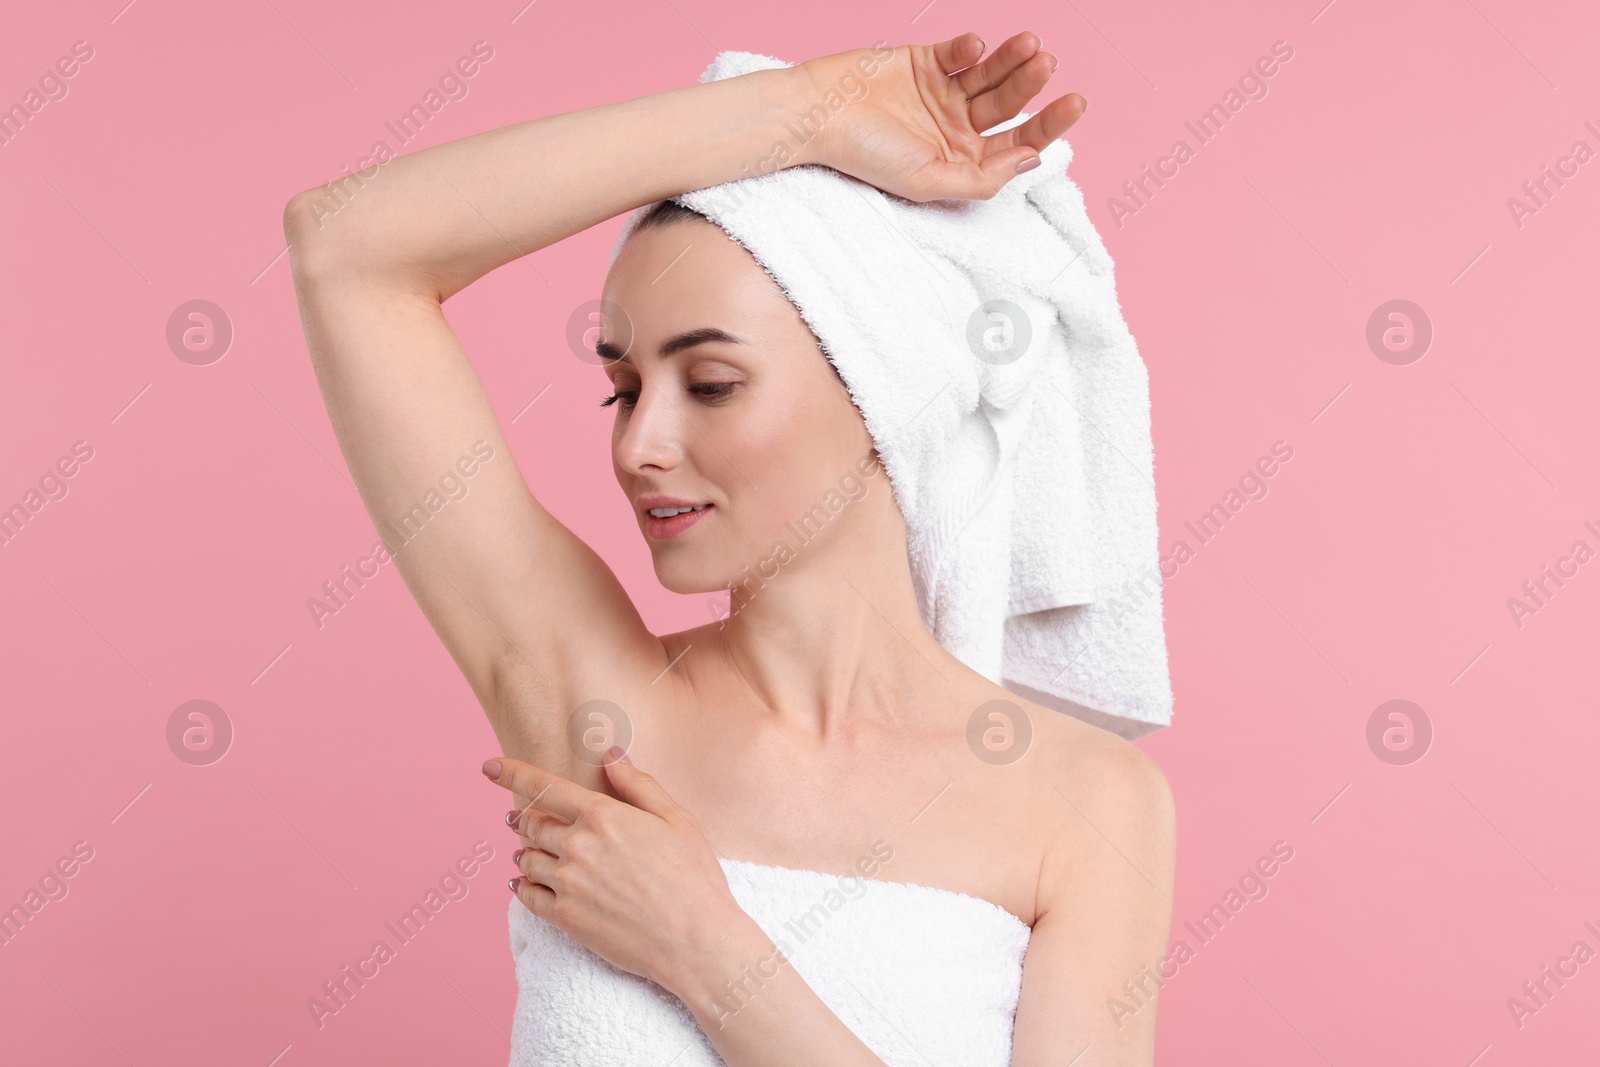 Photo of Beautiful woman showing armpit with smooth clean skin on pink background